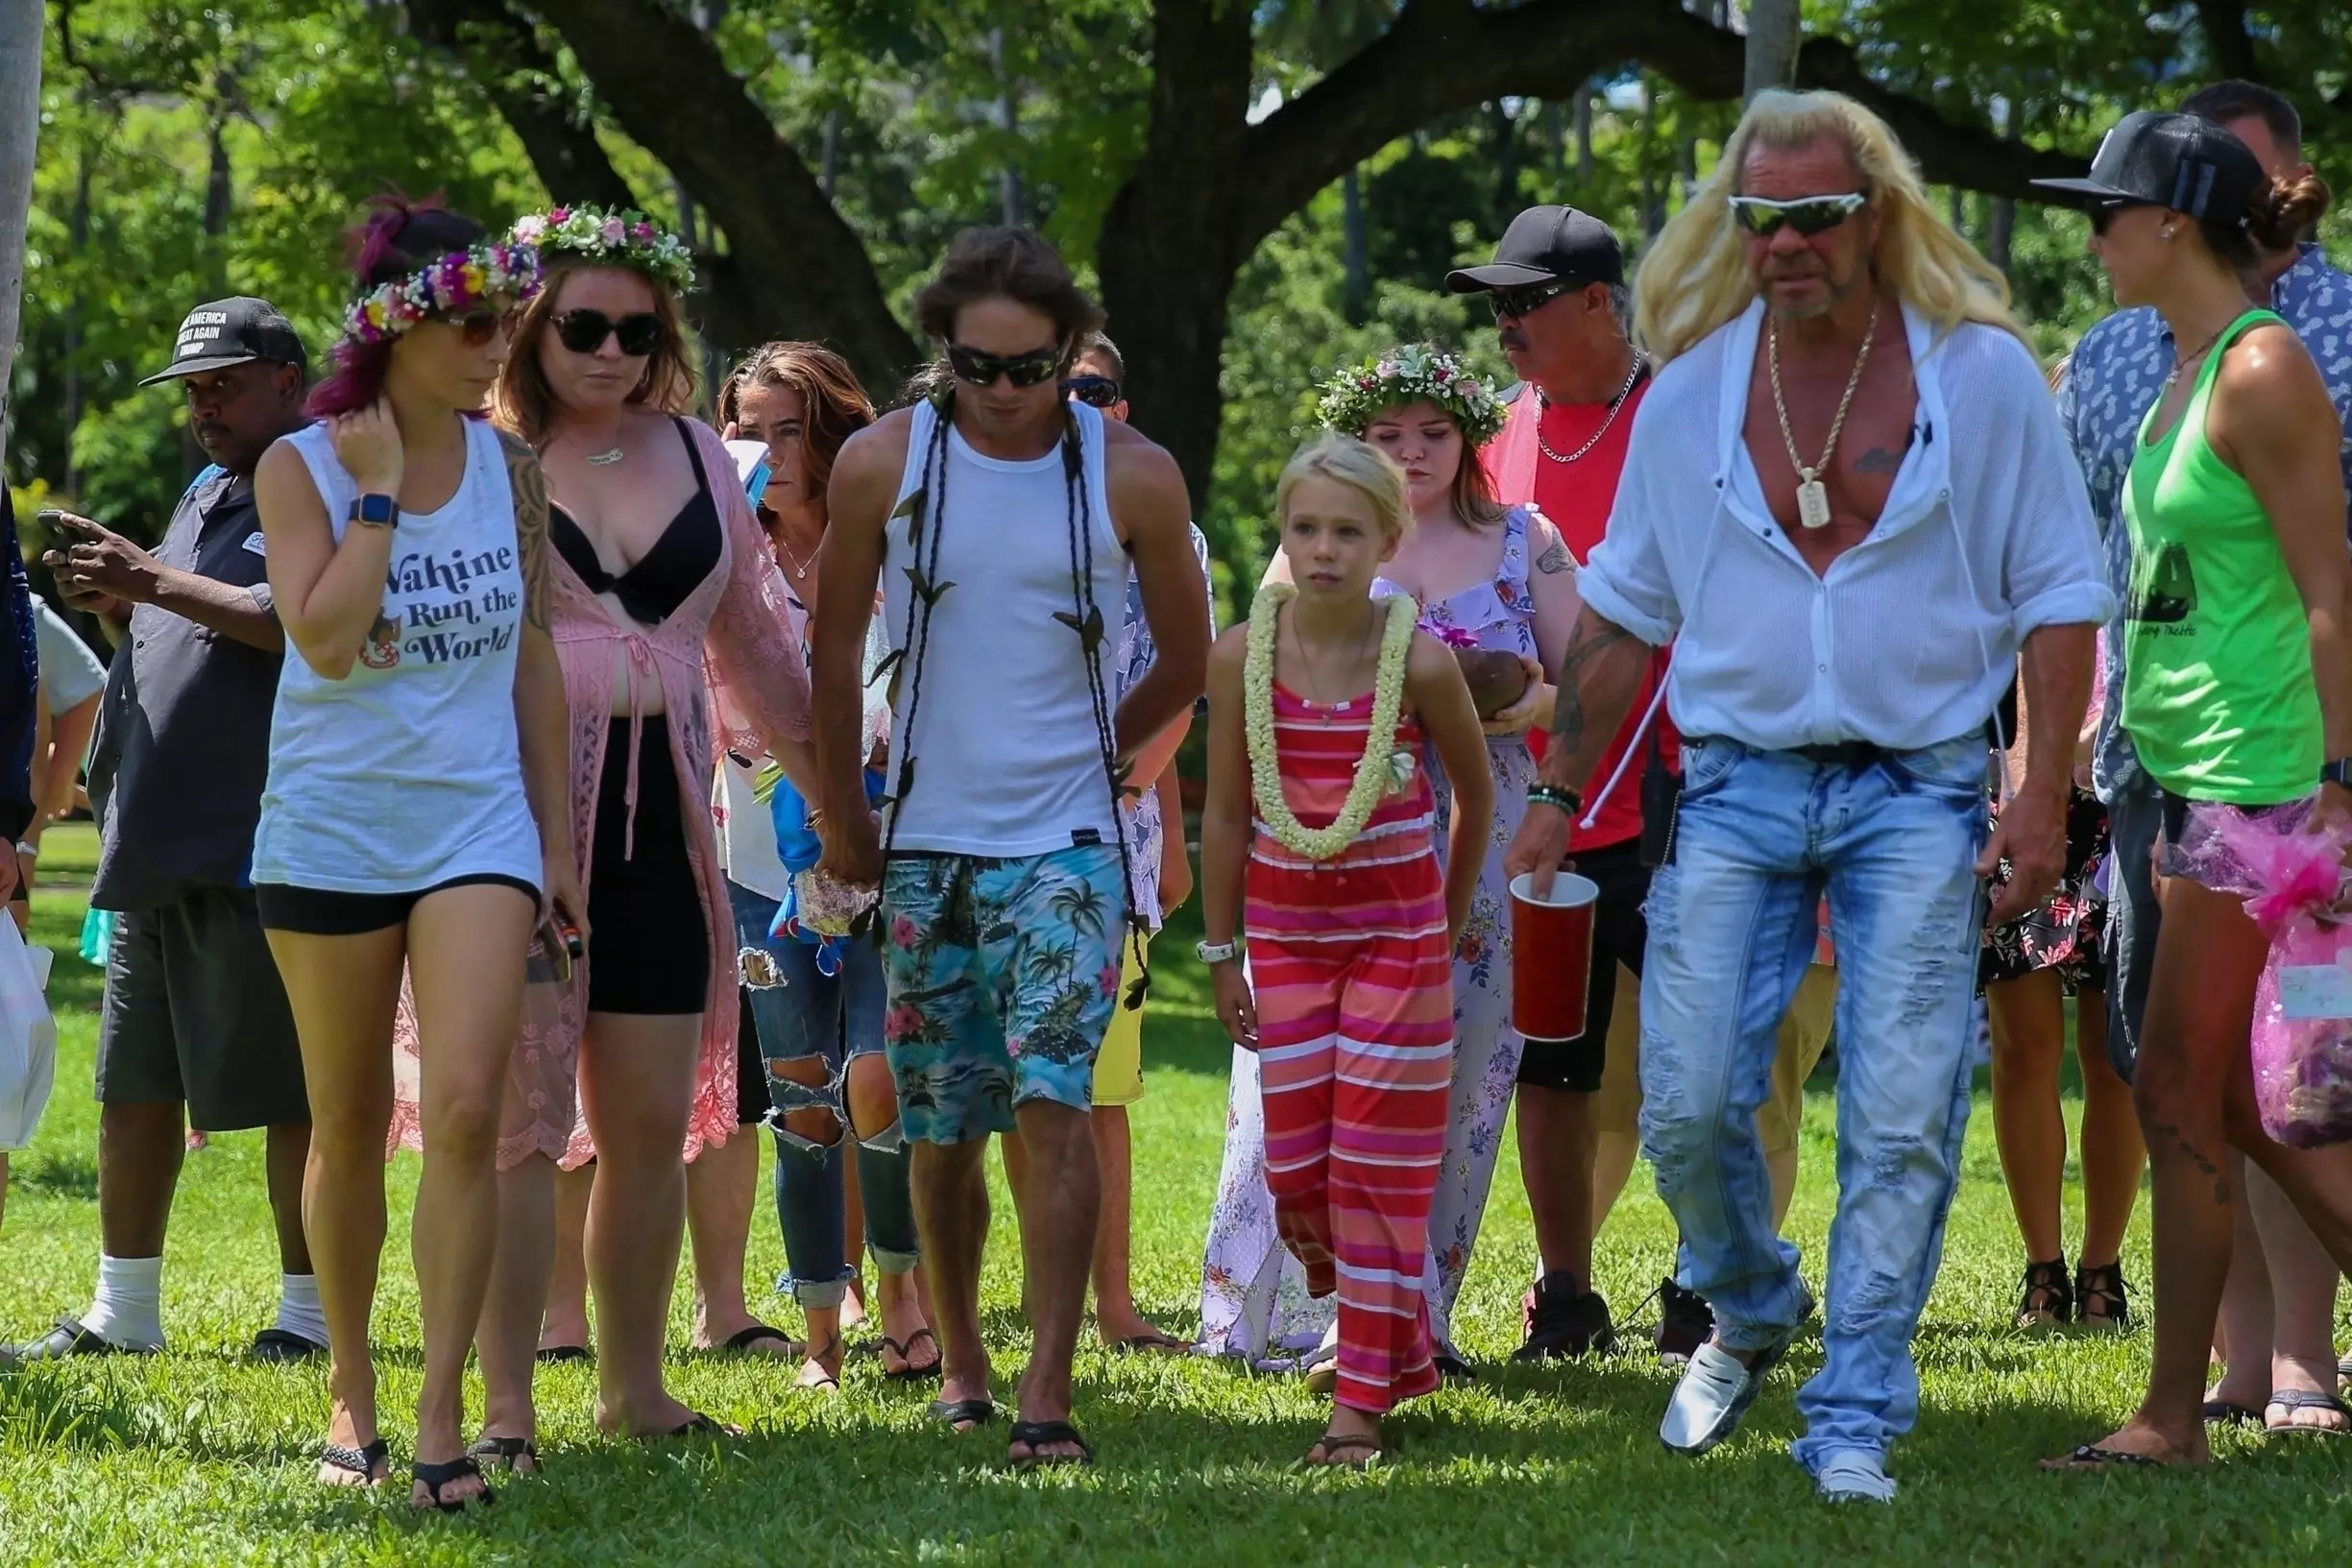 The memorial was held in Hawaii which followed Beth's wishes.